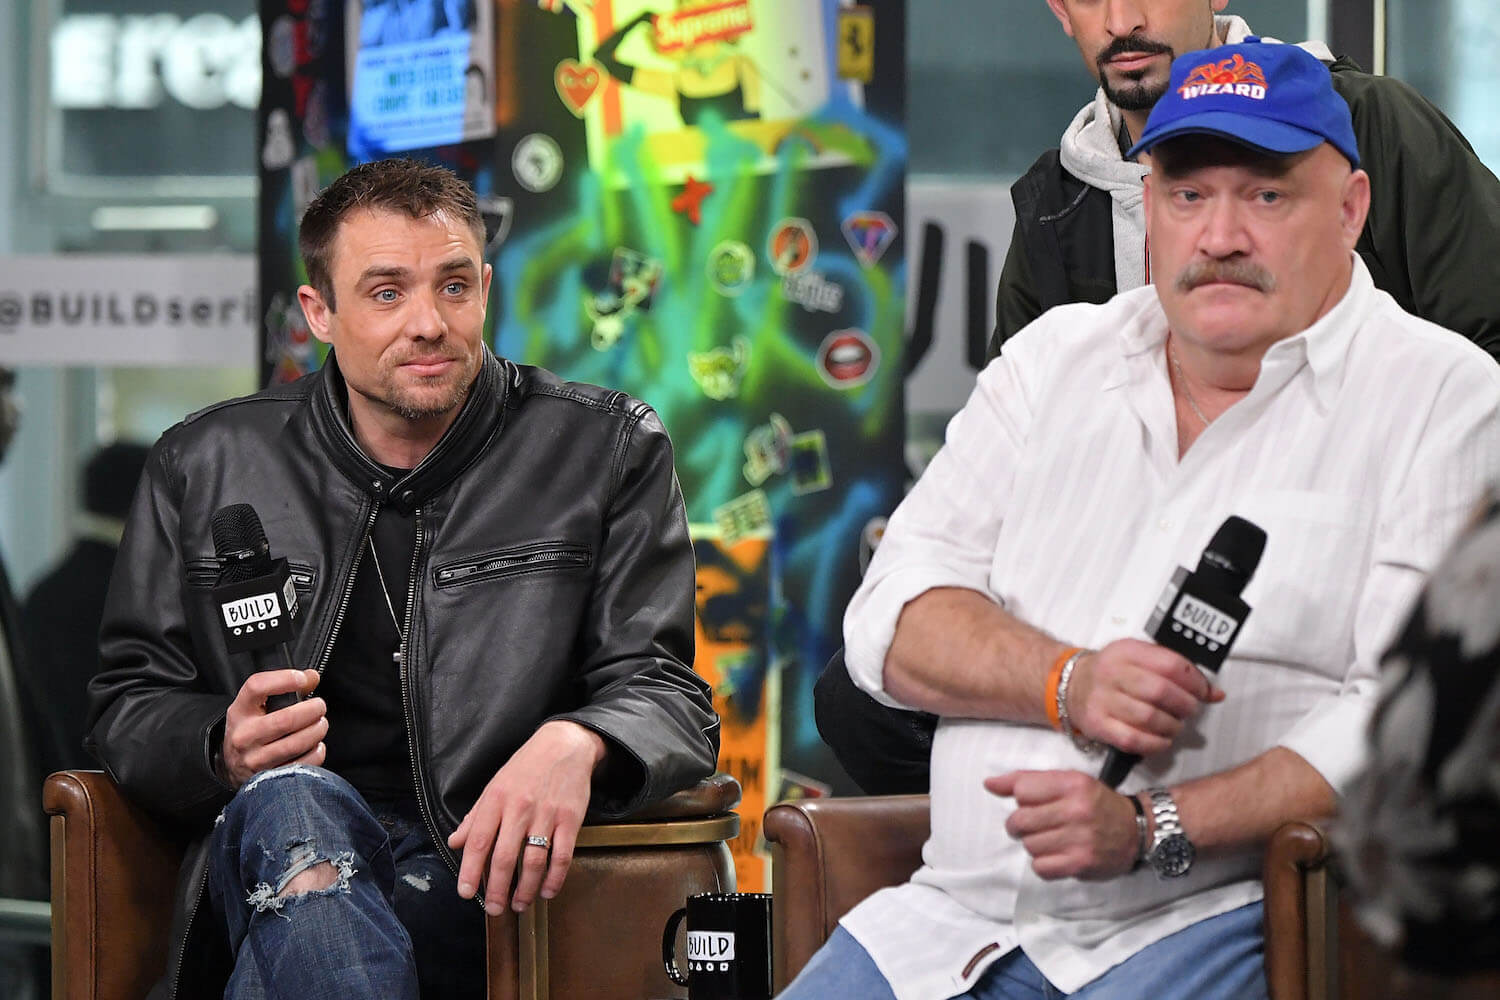 'Deadliest Catch' stars Jake Anderson and Keith Colburn speaking during an interview. Anderson and Colburn saw extremely dangerous moments while fishing.